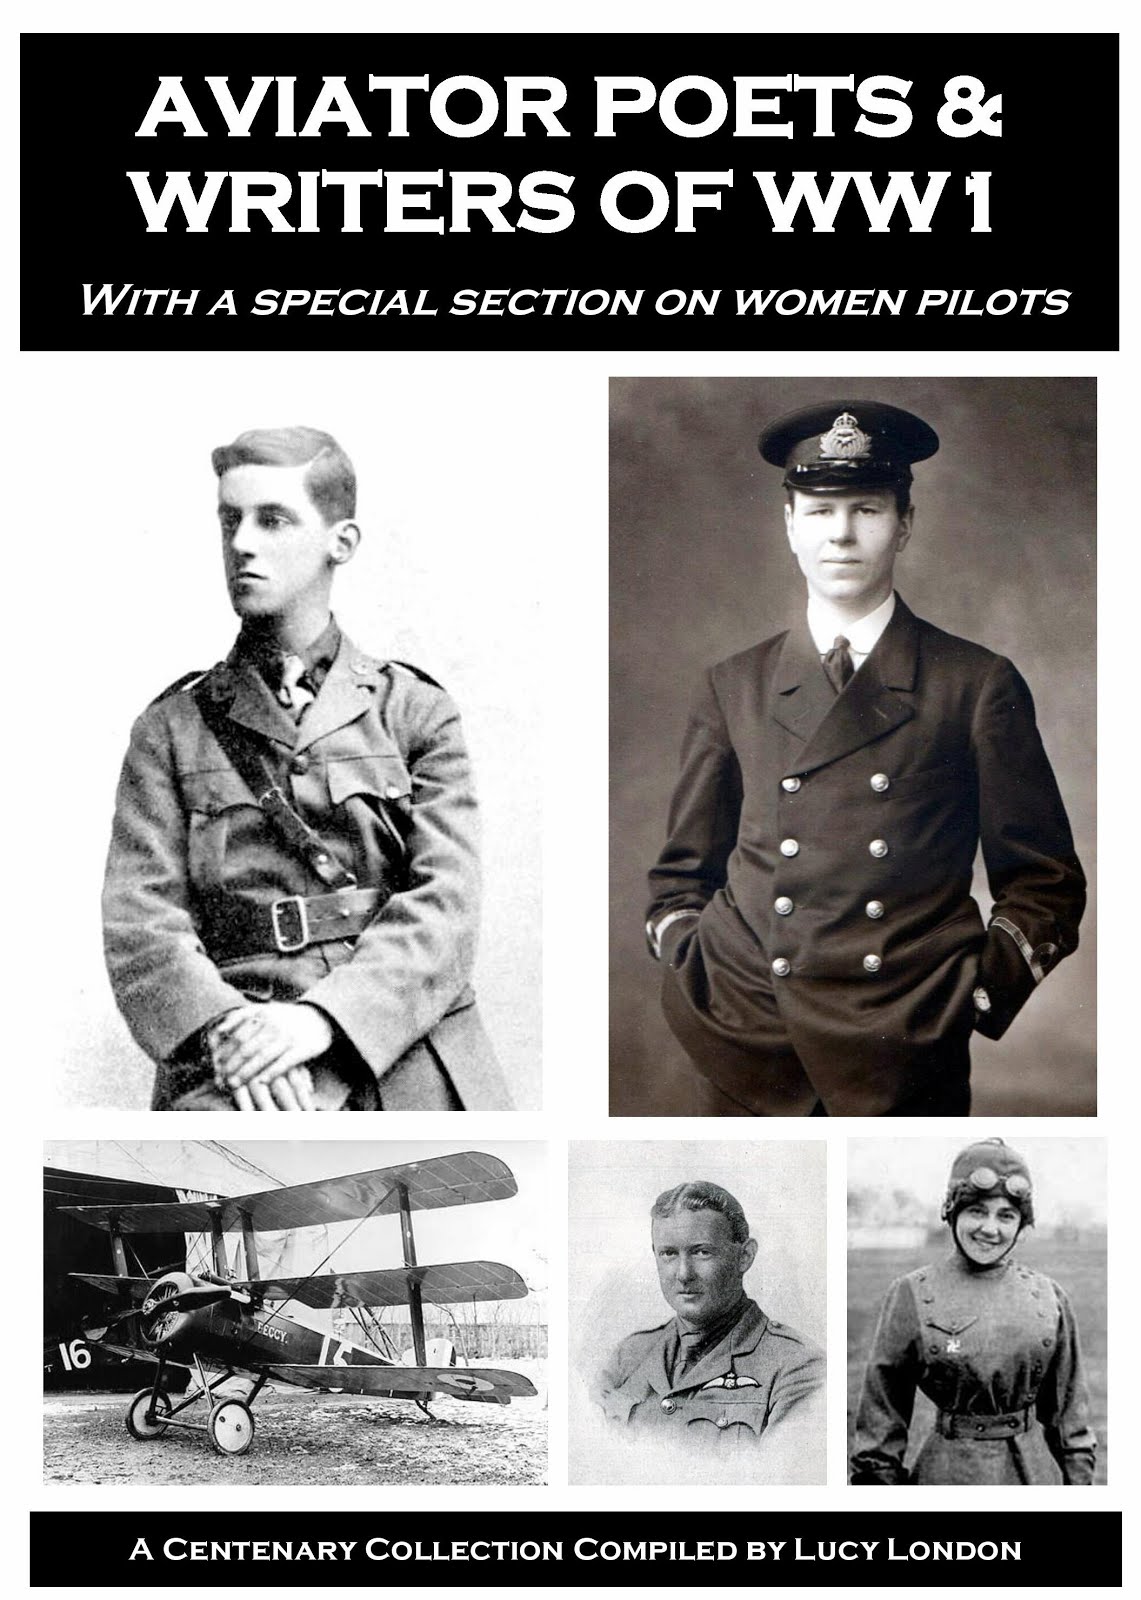 Aviator Poets & Writers of WW1 - new book now available